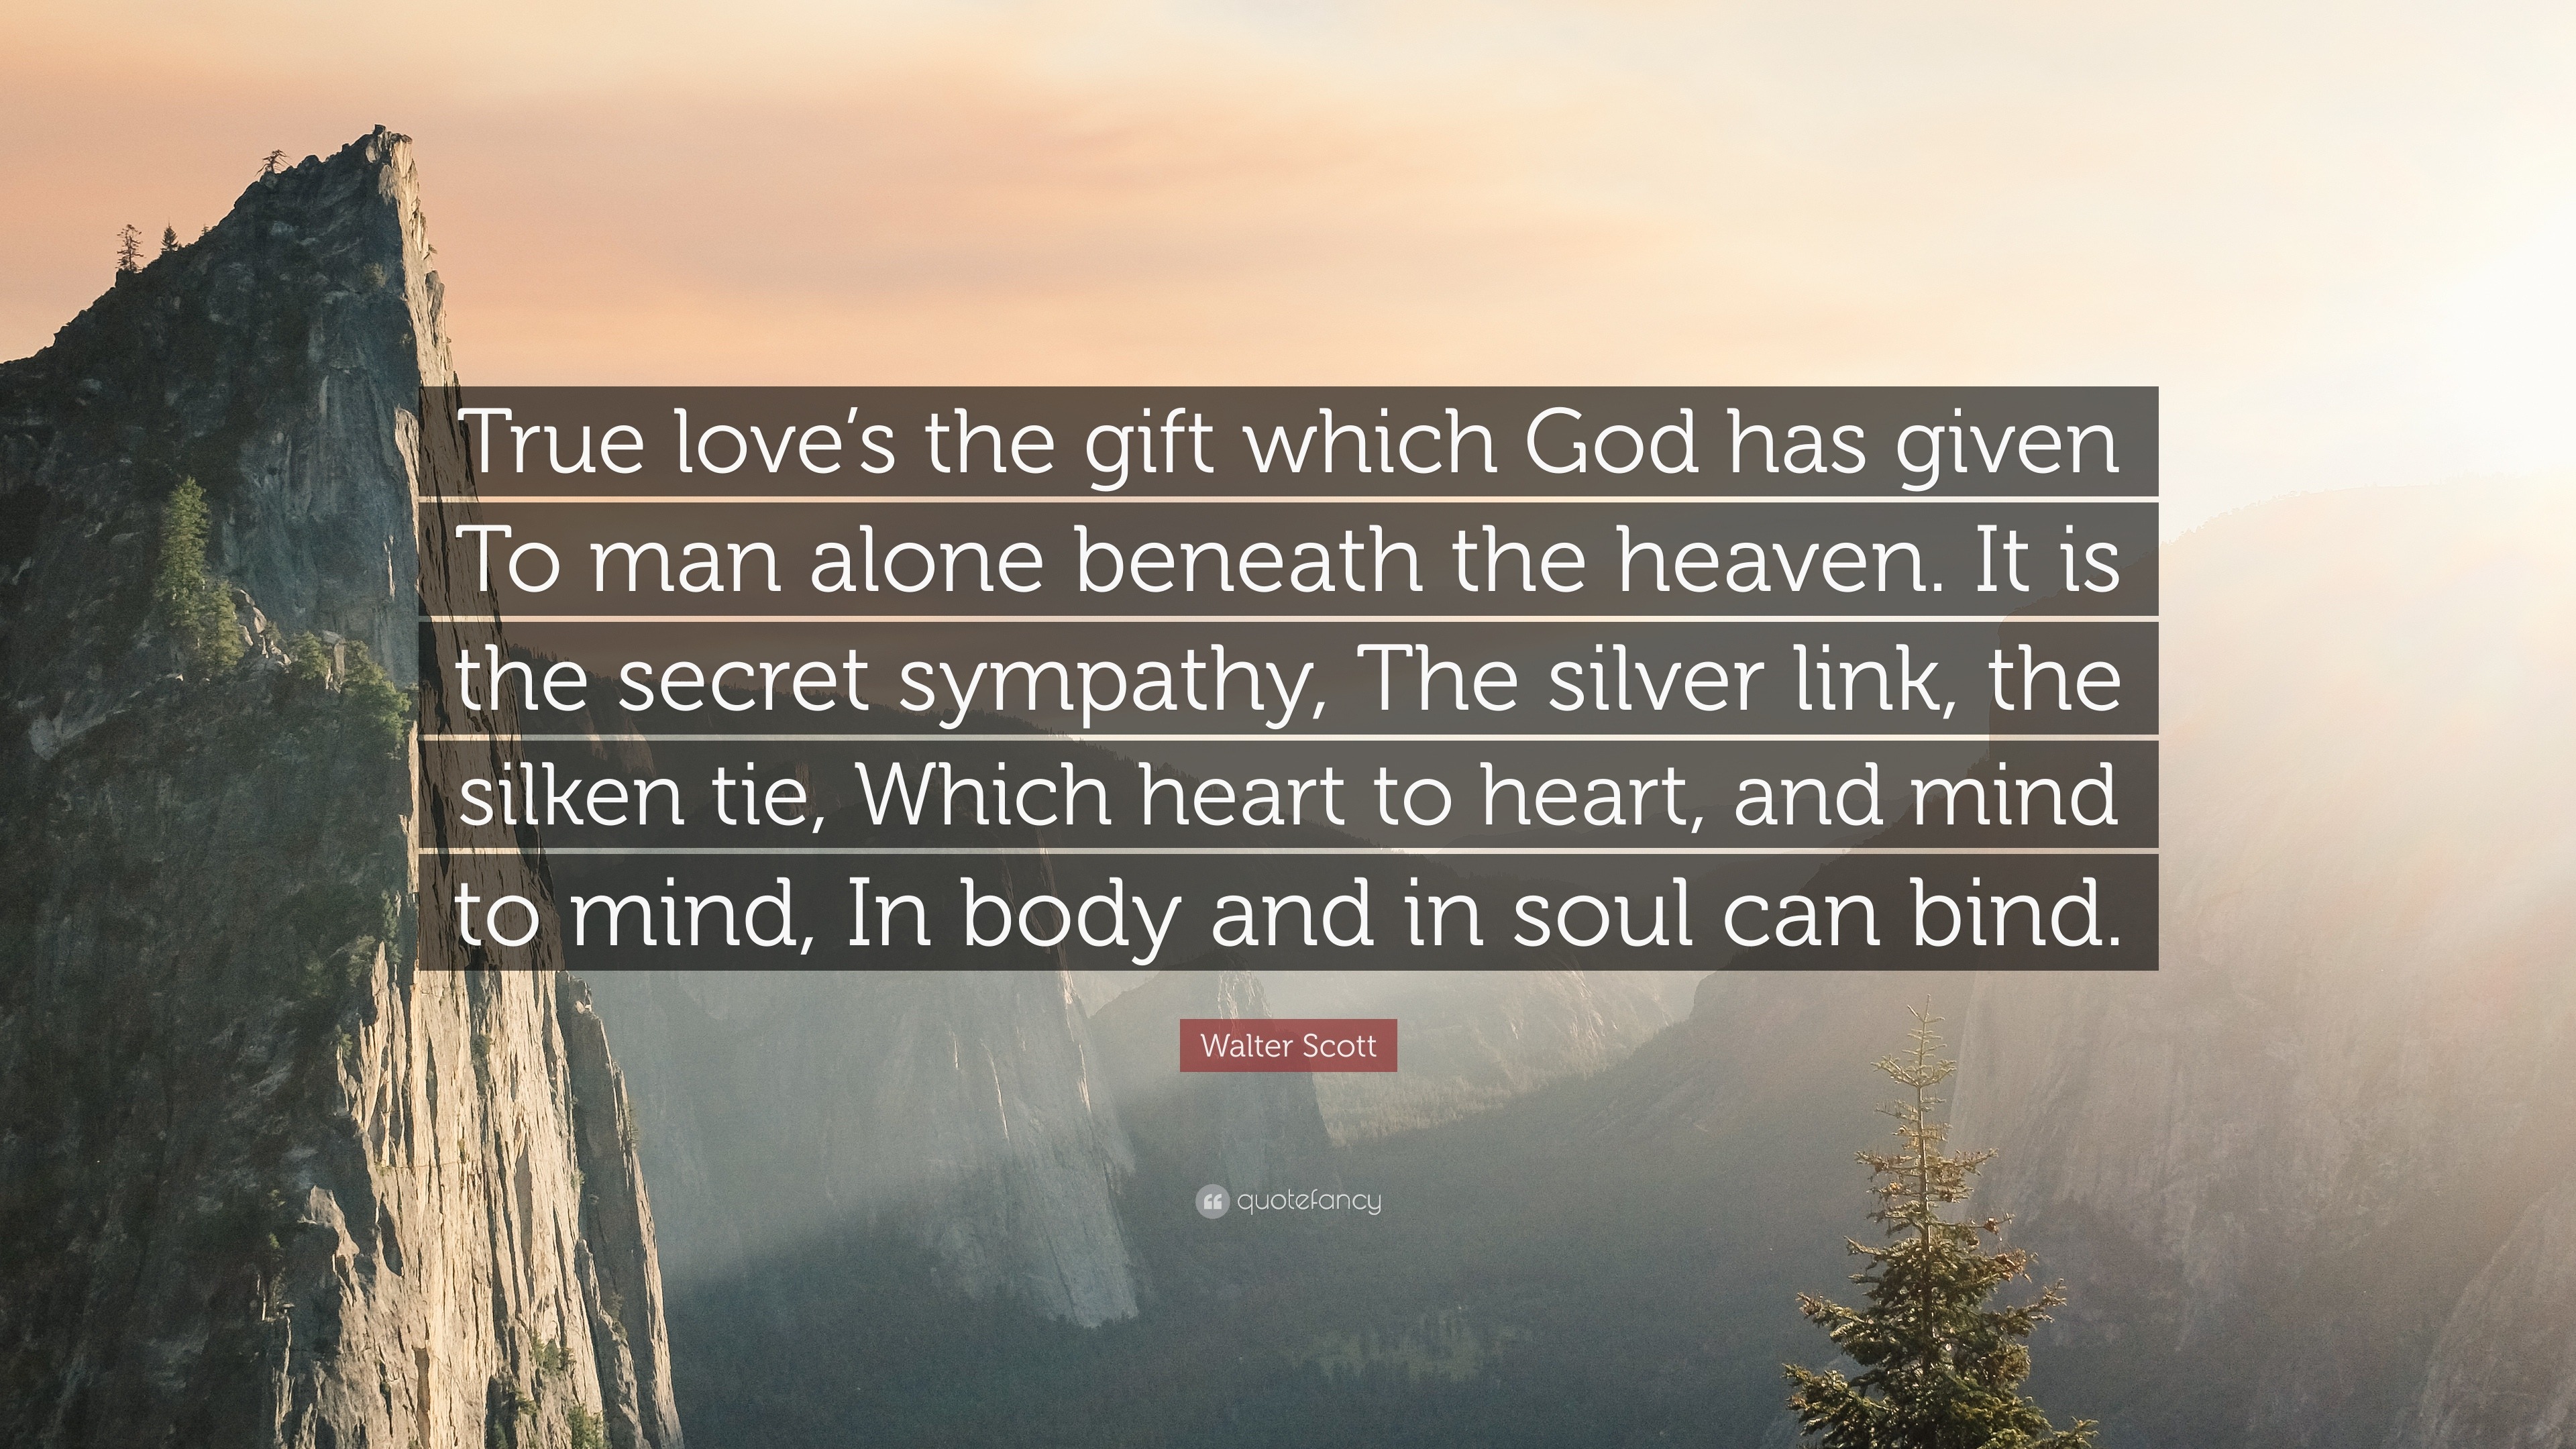 Walter Scott Quote “True love s the t which God has given To man alone